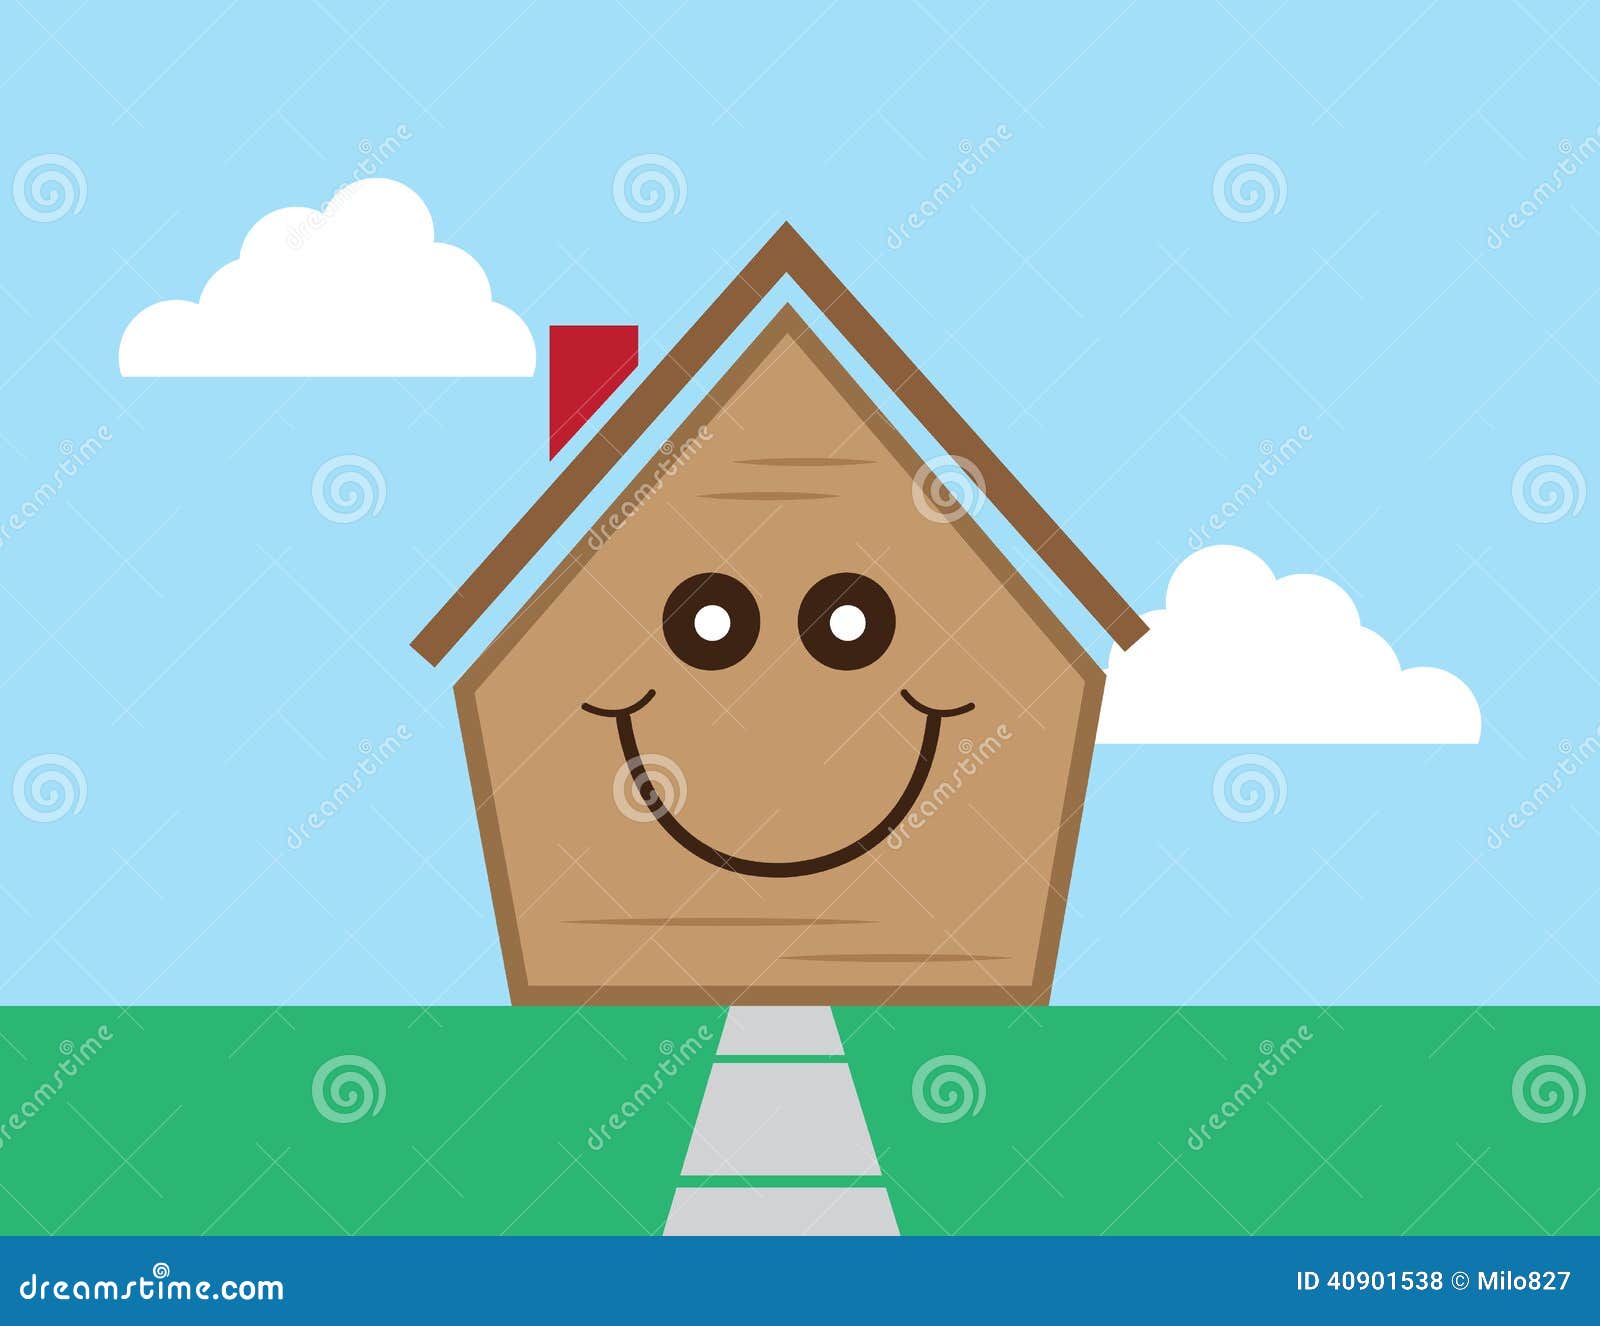 house face happy